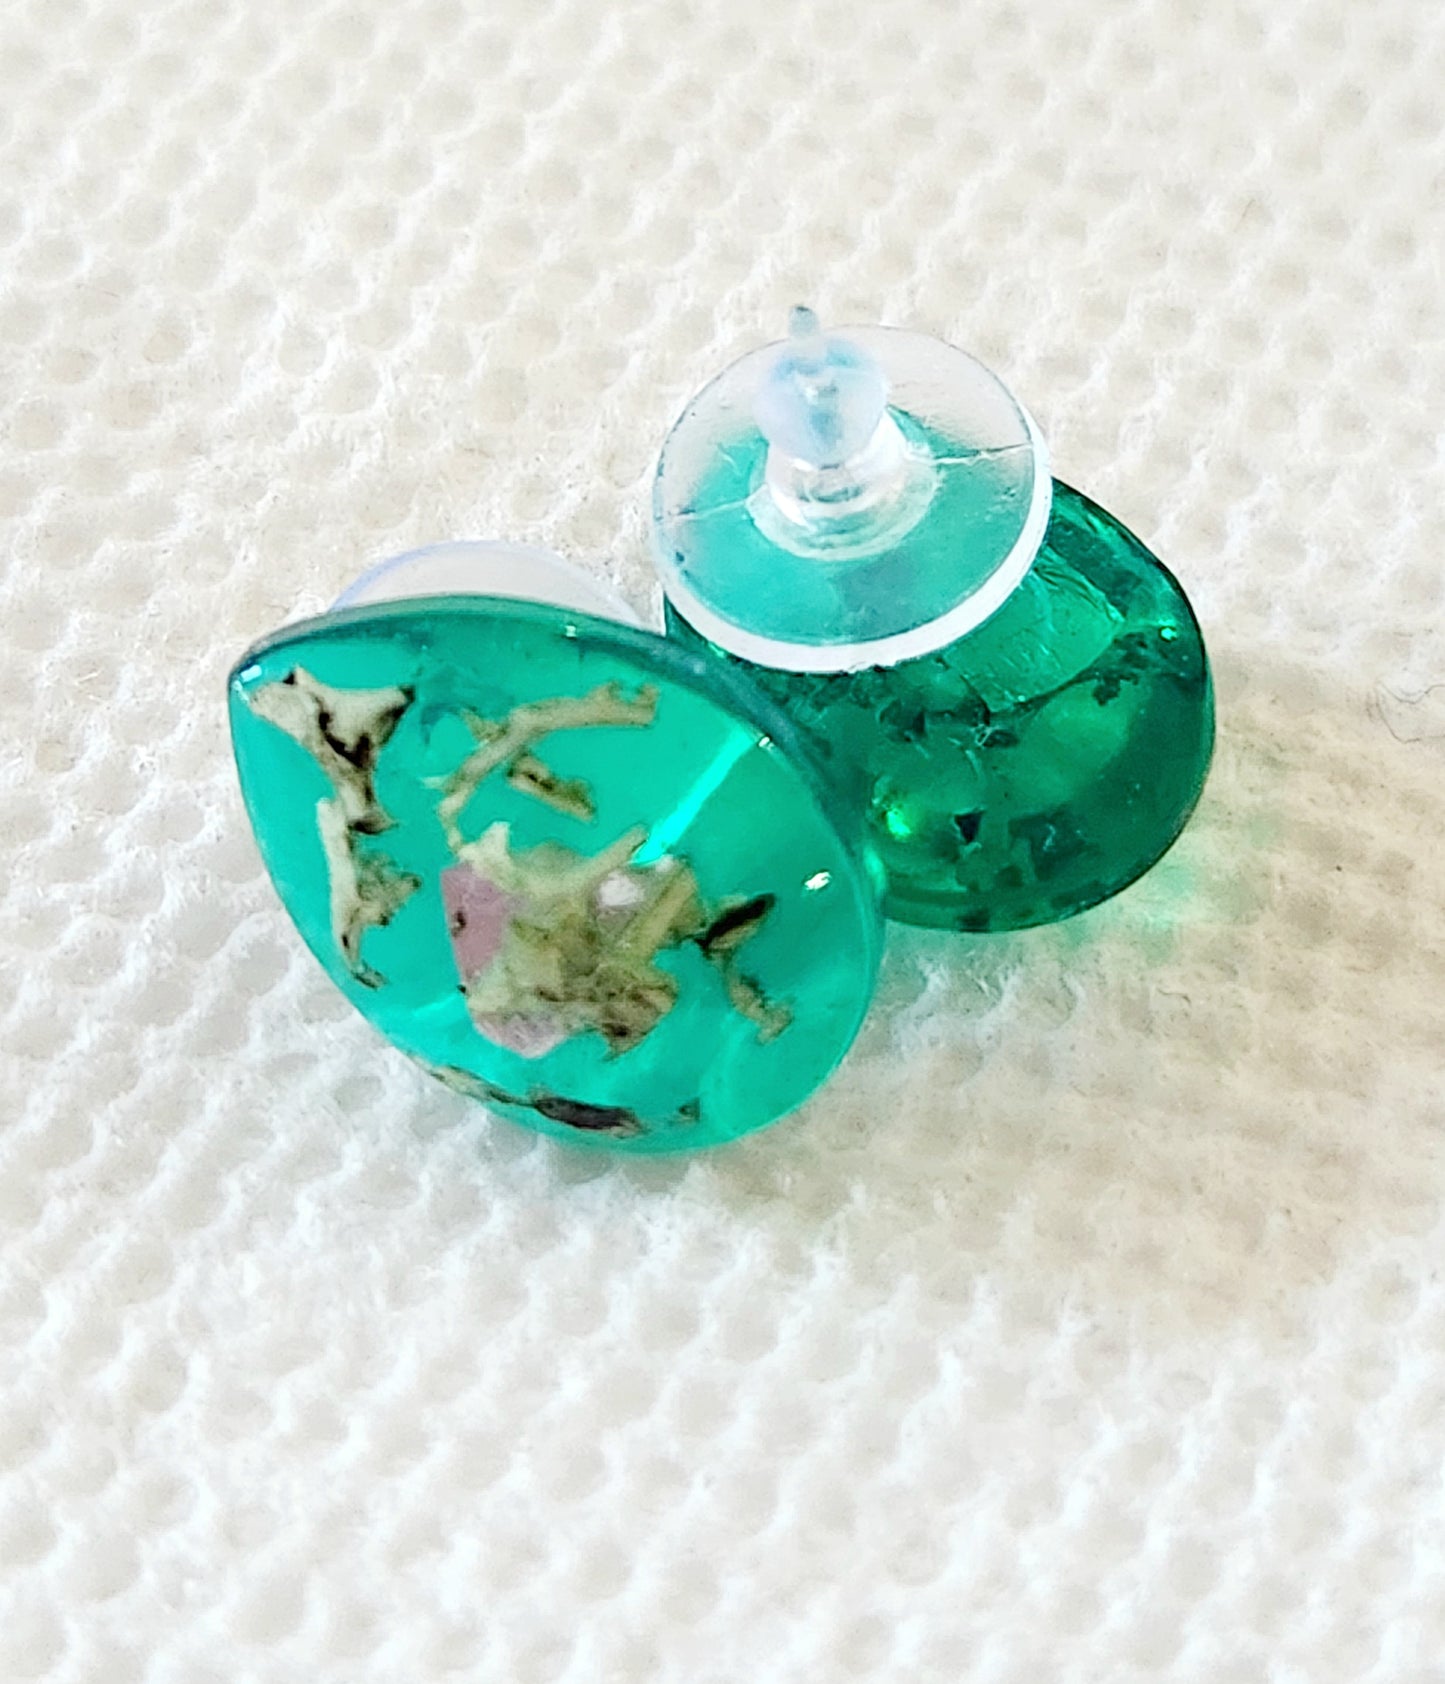 Small green earrings with real plants